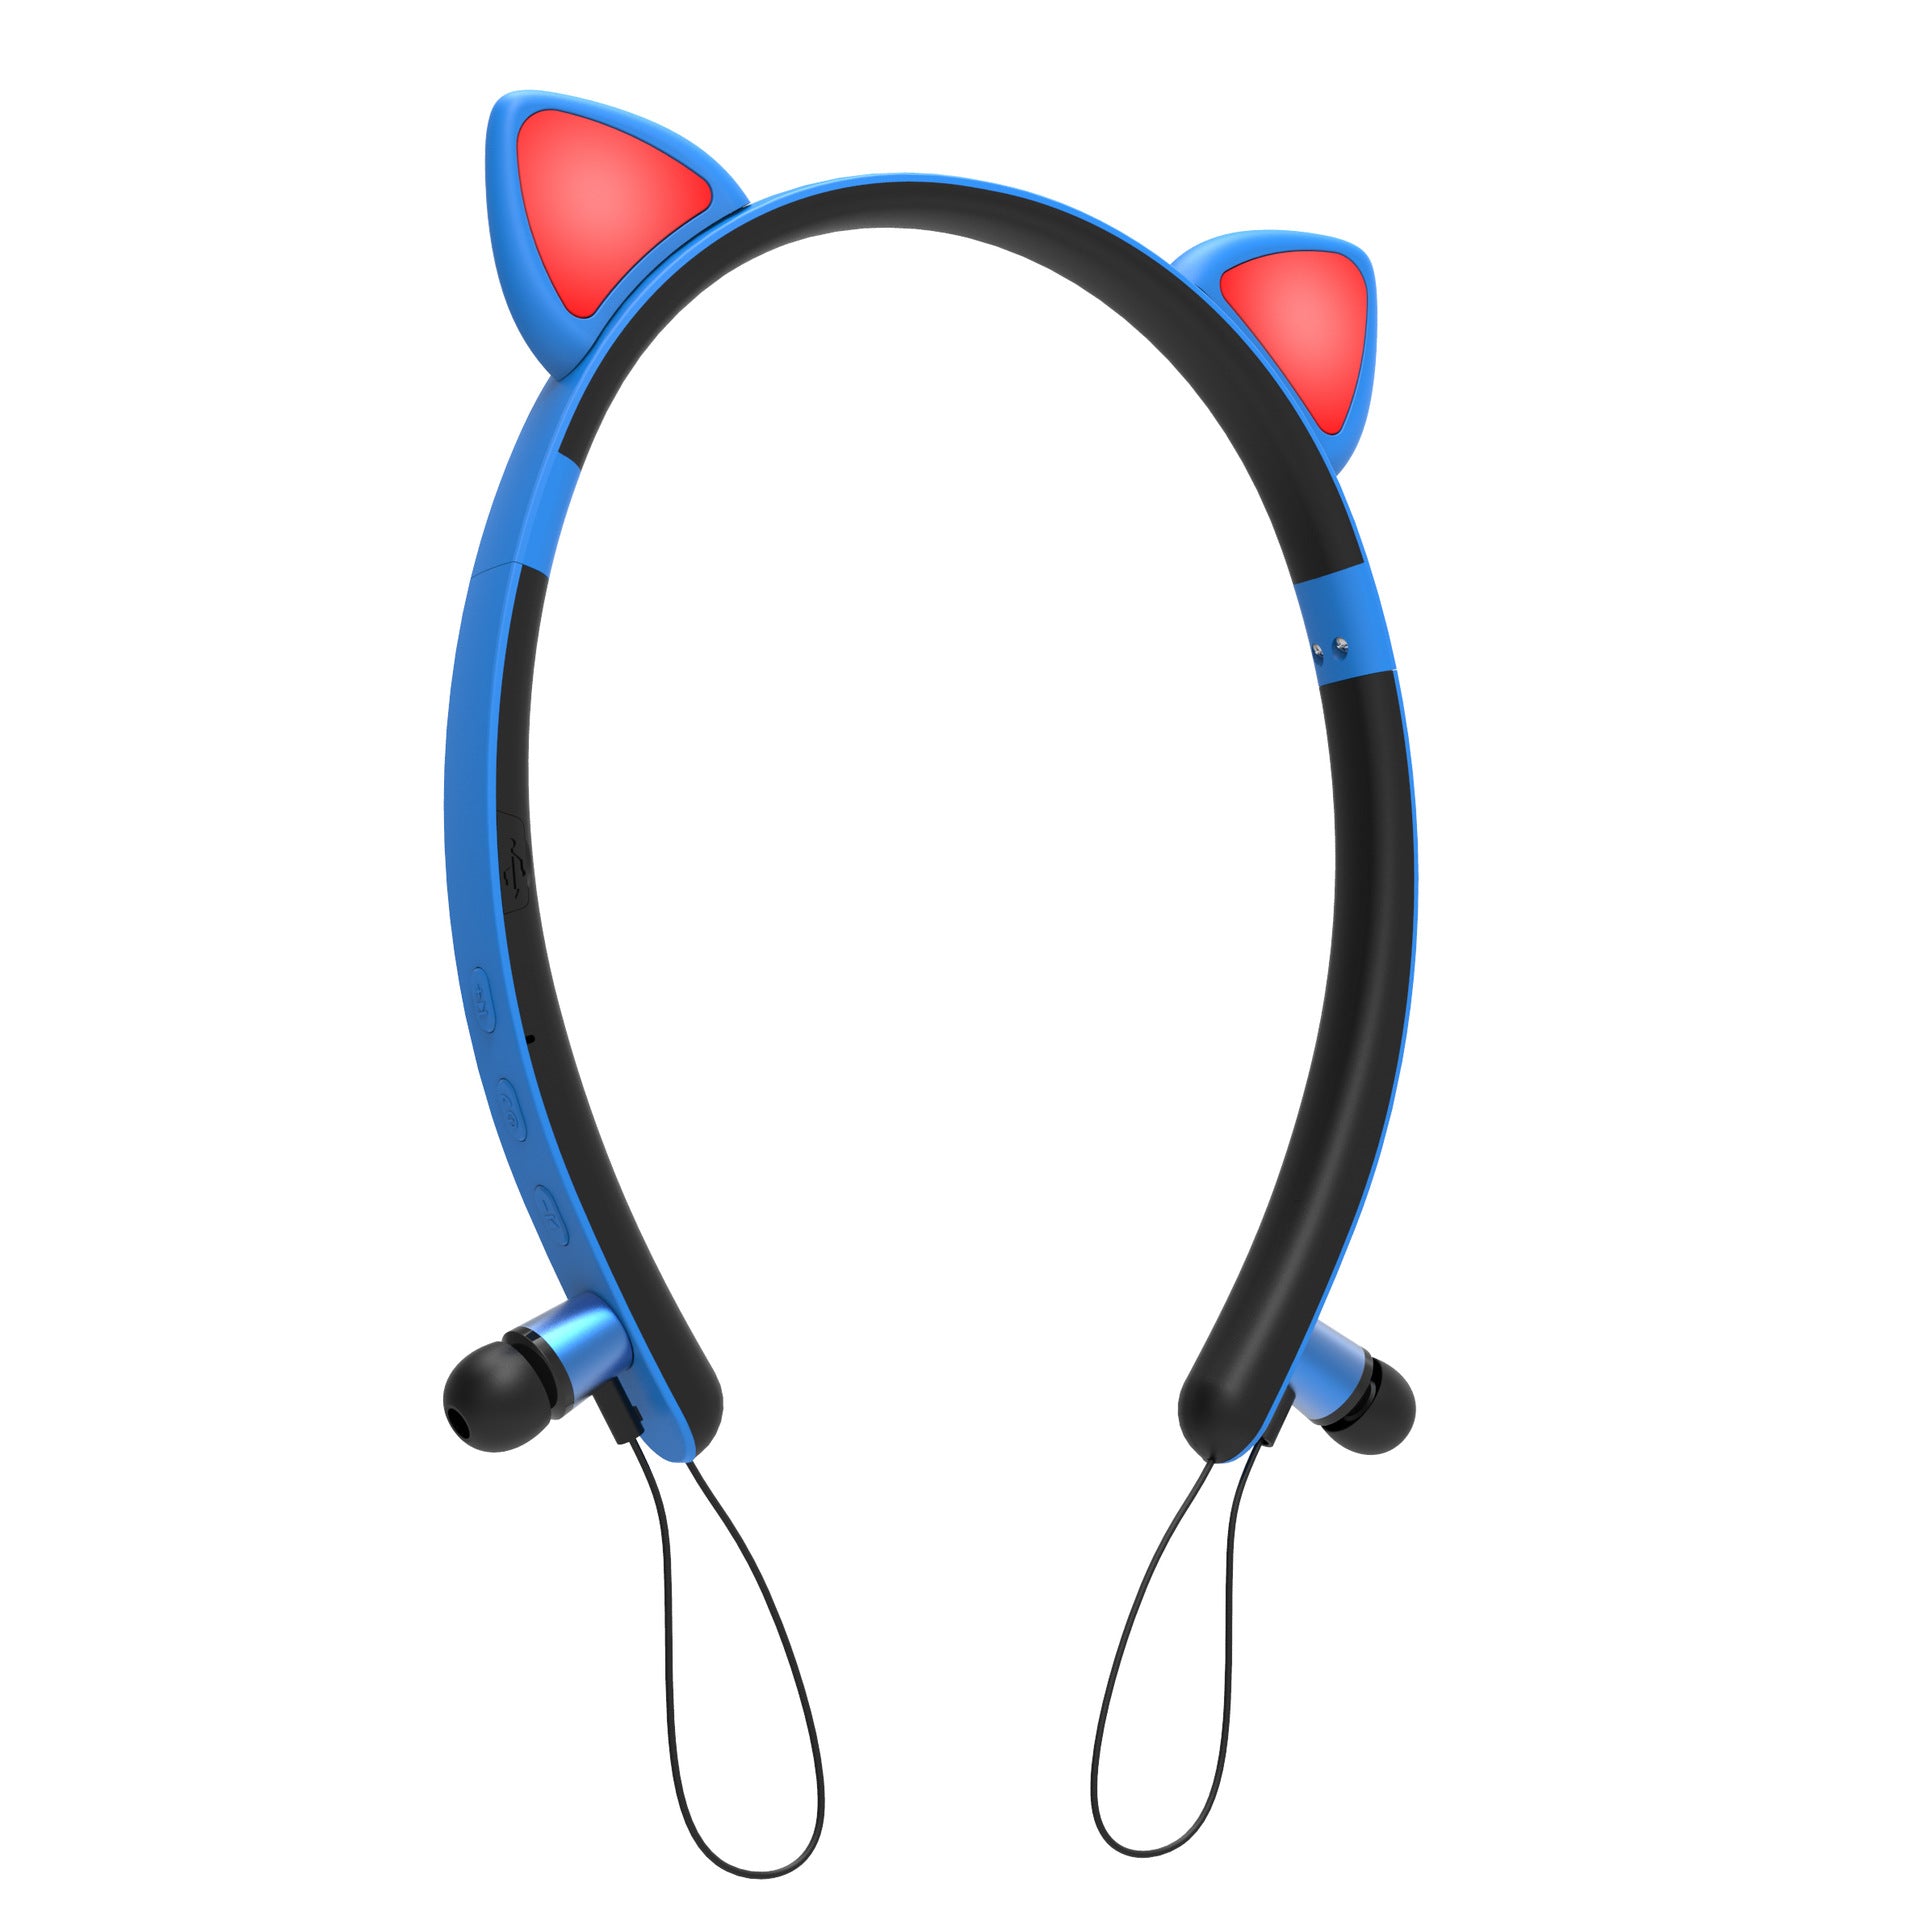 LED Glowing True Wireless Bluetooth Headphones Auriculares Cartoon Girl Headband Cat Ear Headset With Microphone For All Phones